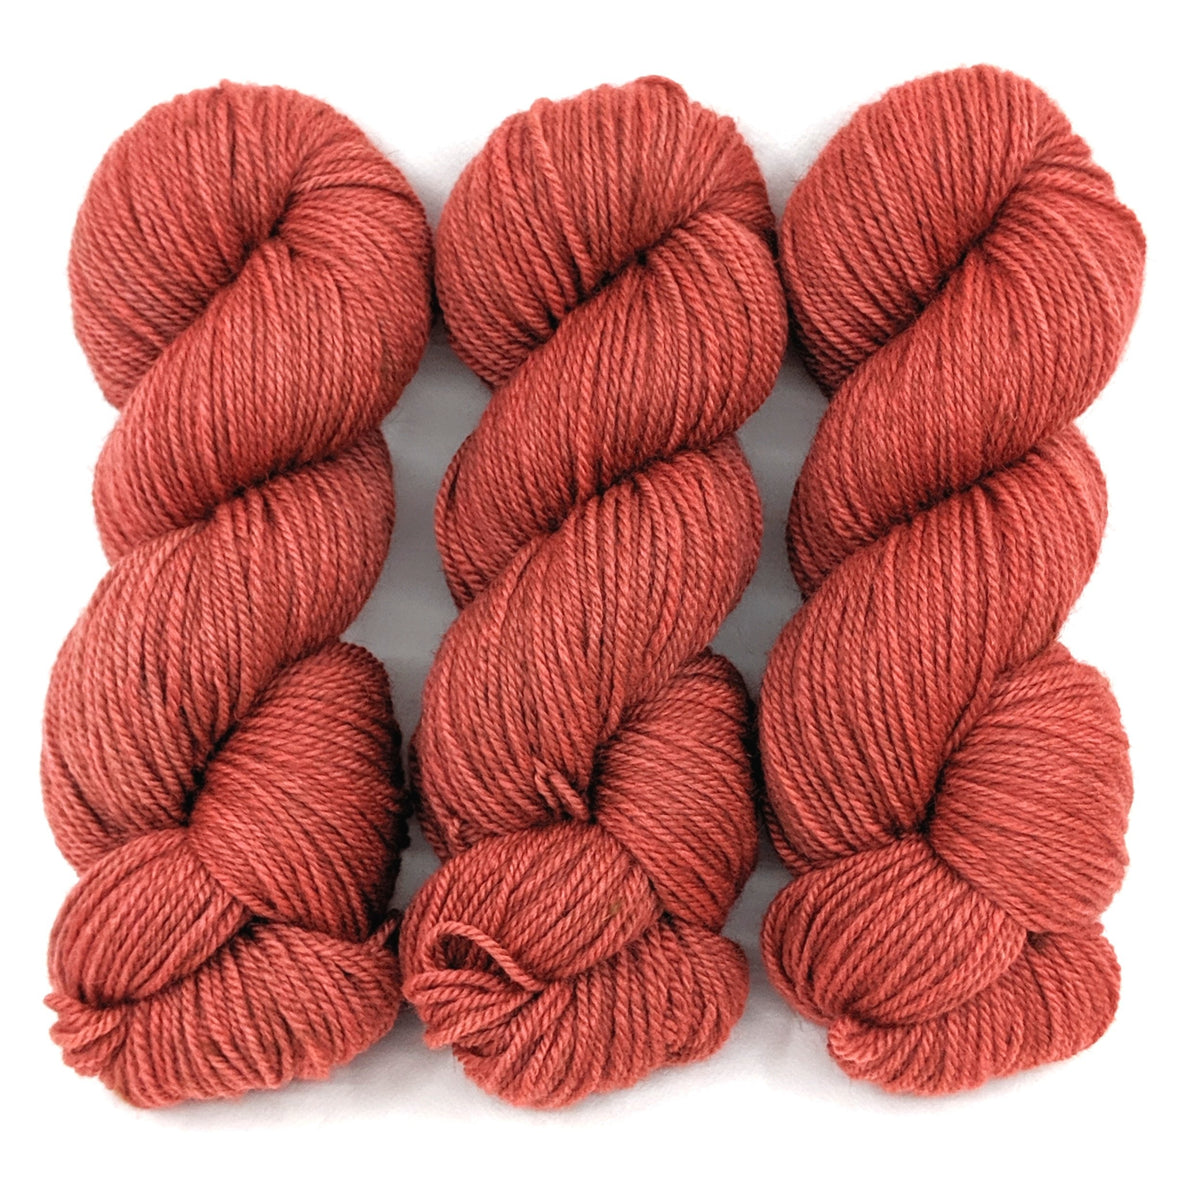 Coral - Lascaux Worsted - Discontinued Colour